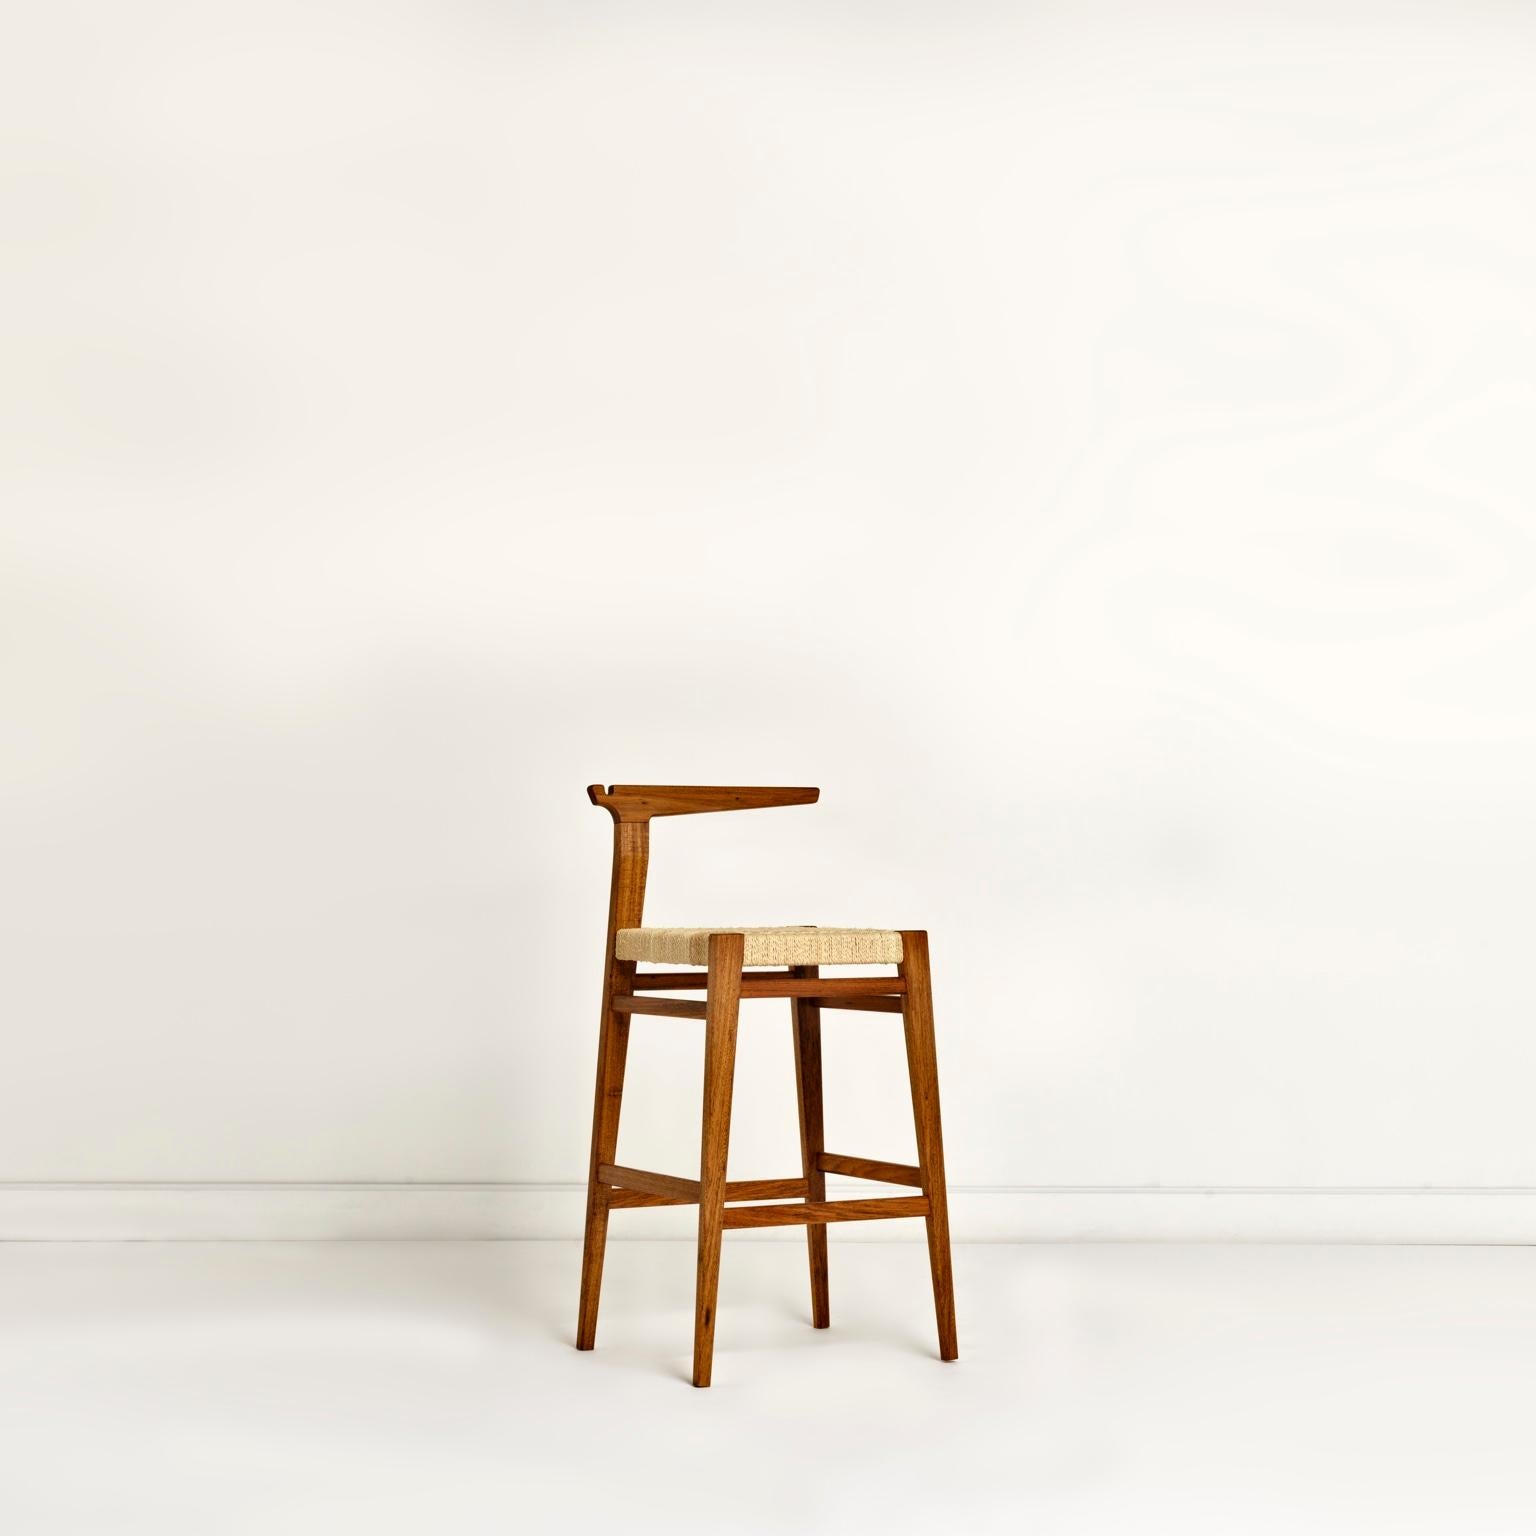 Contemporary bar stool in Brazilian hardwood and cord.

We named this chair 